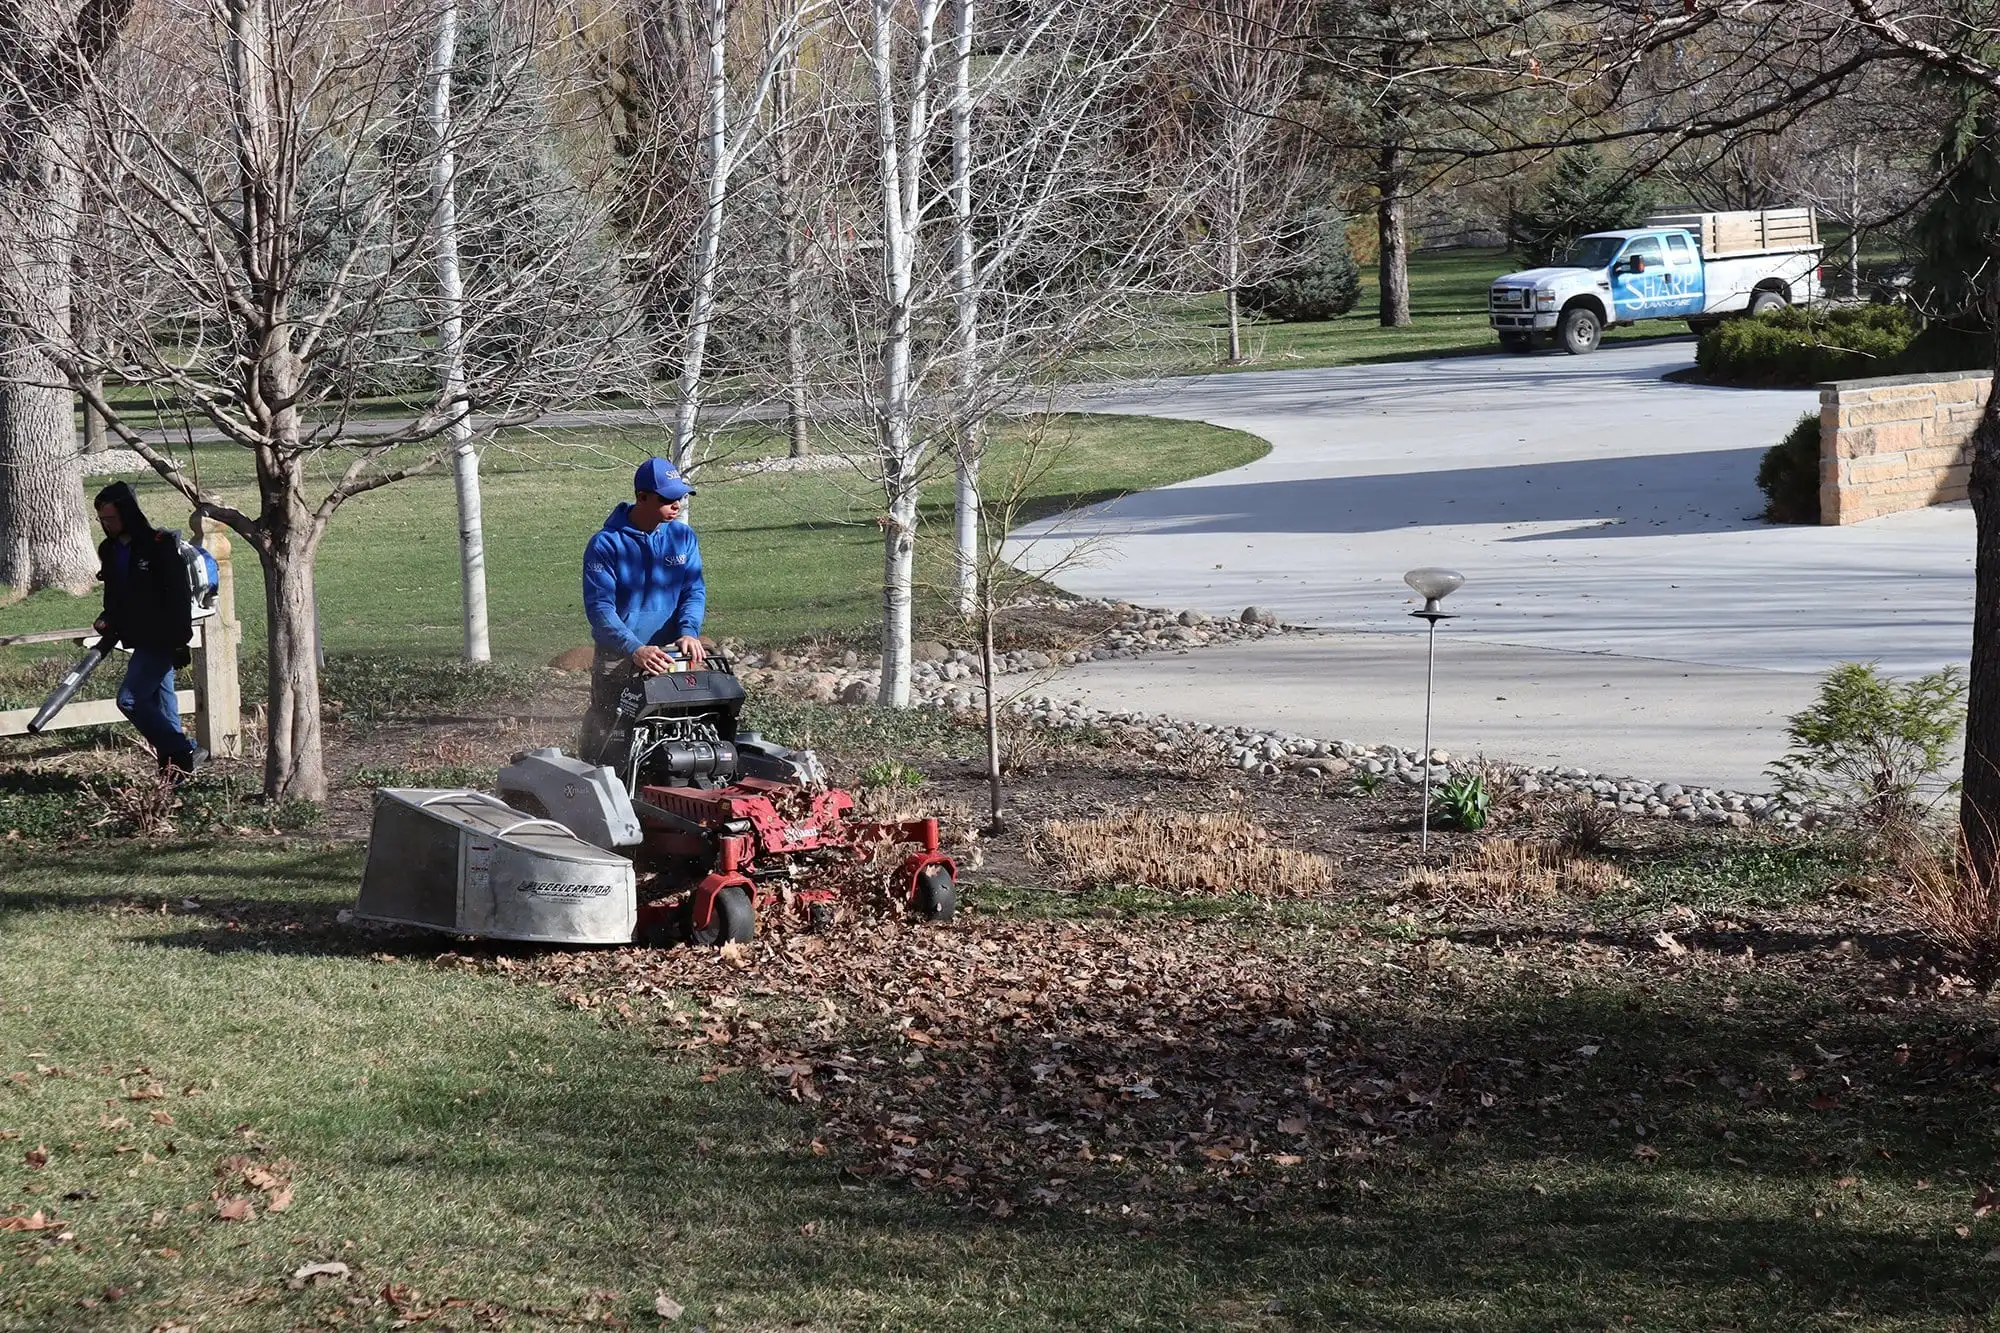 Clearing leaves from a lawn in Sioux City, IA.